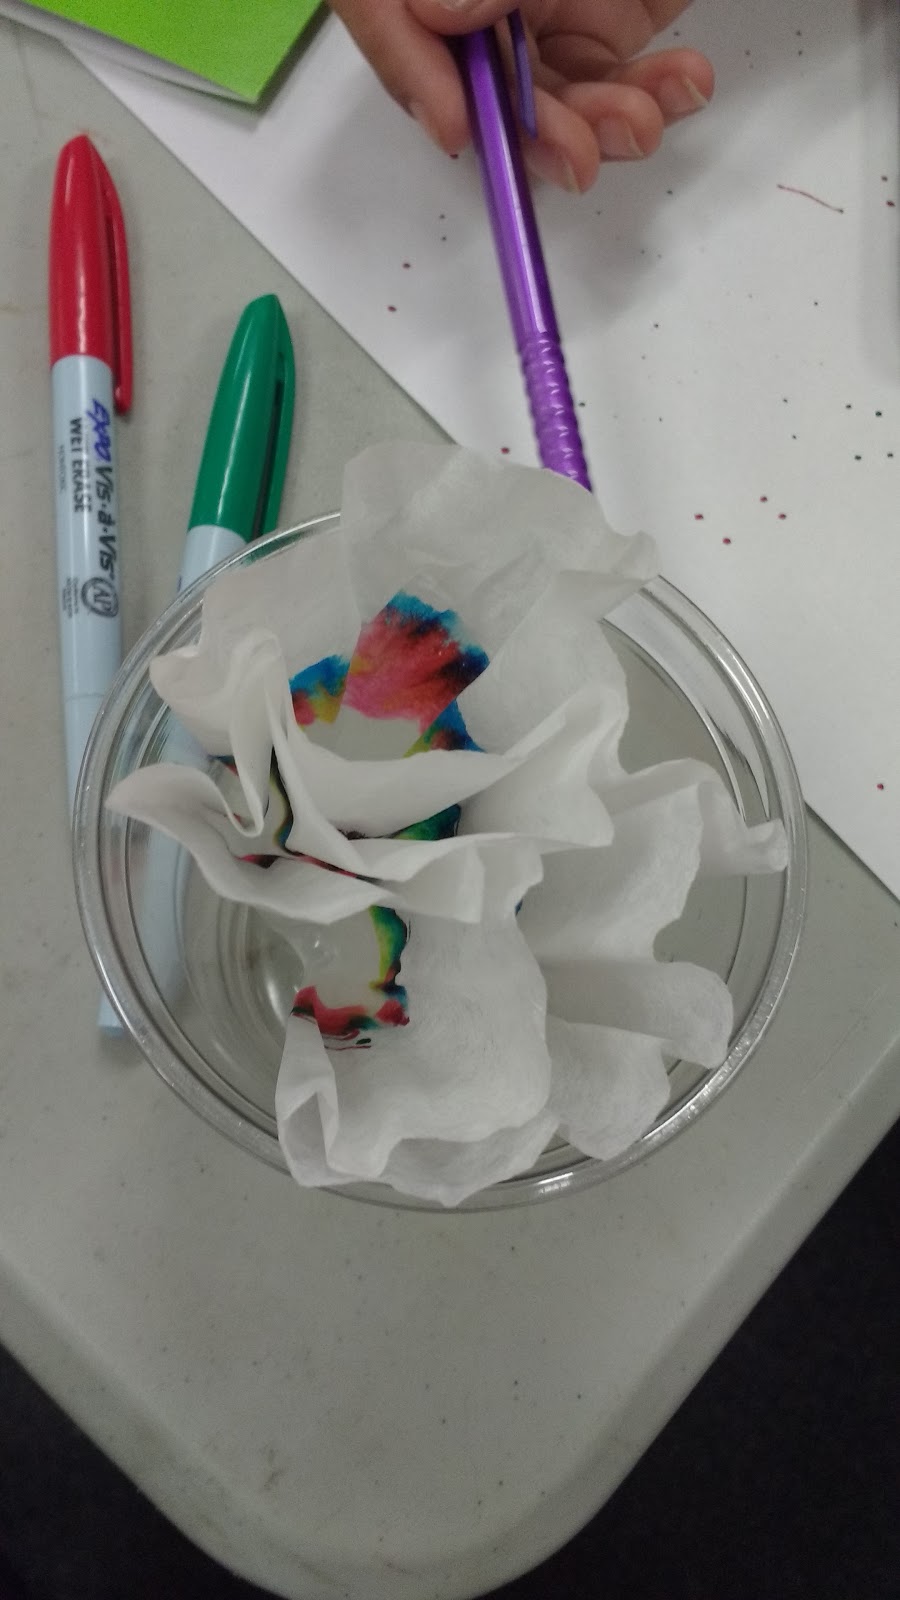 Chromatography Butterflies - Chromaflies Bulletin Board - Coffee Filter Chromatography Lab for Physical Science or Chemistry